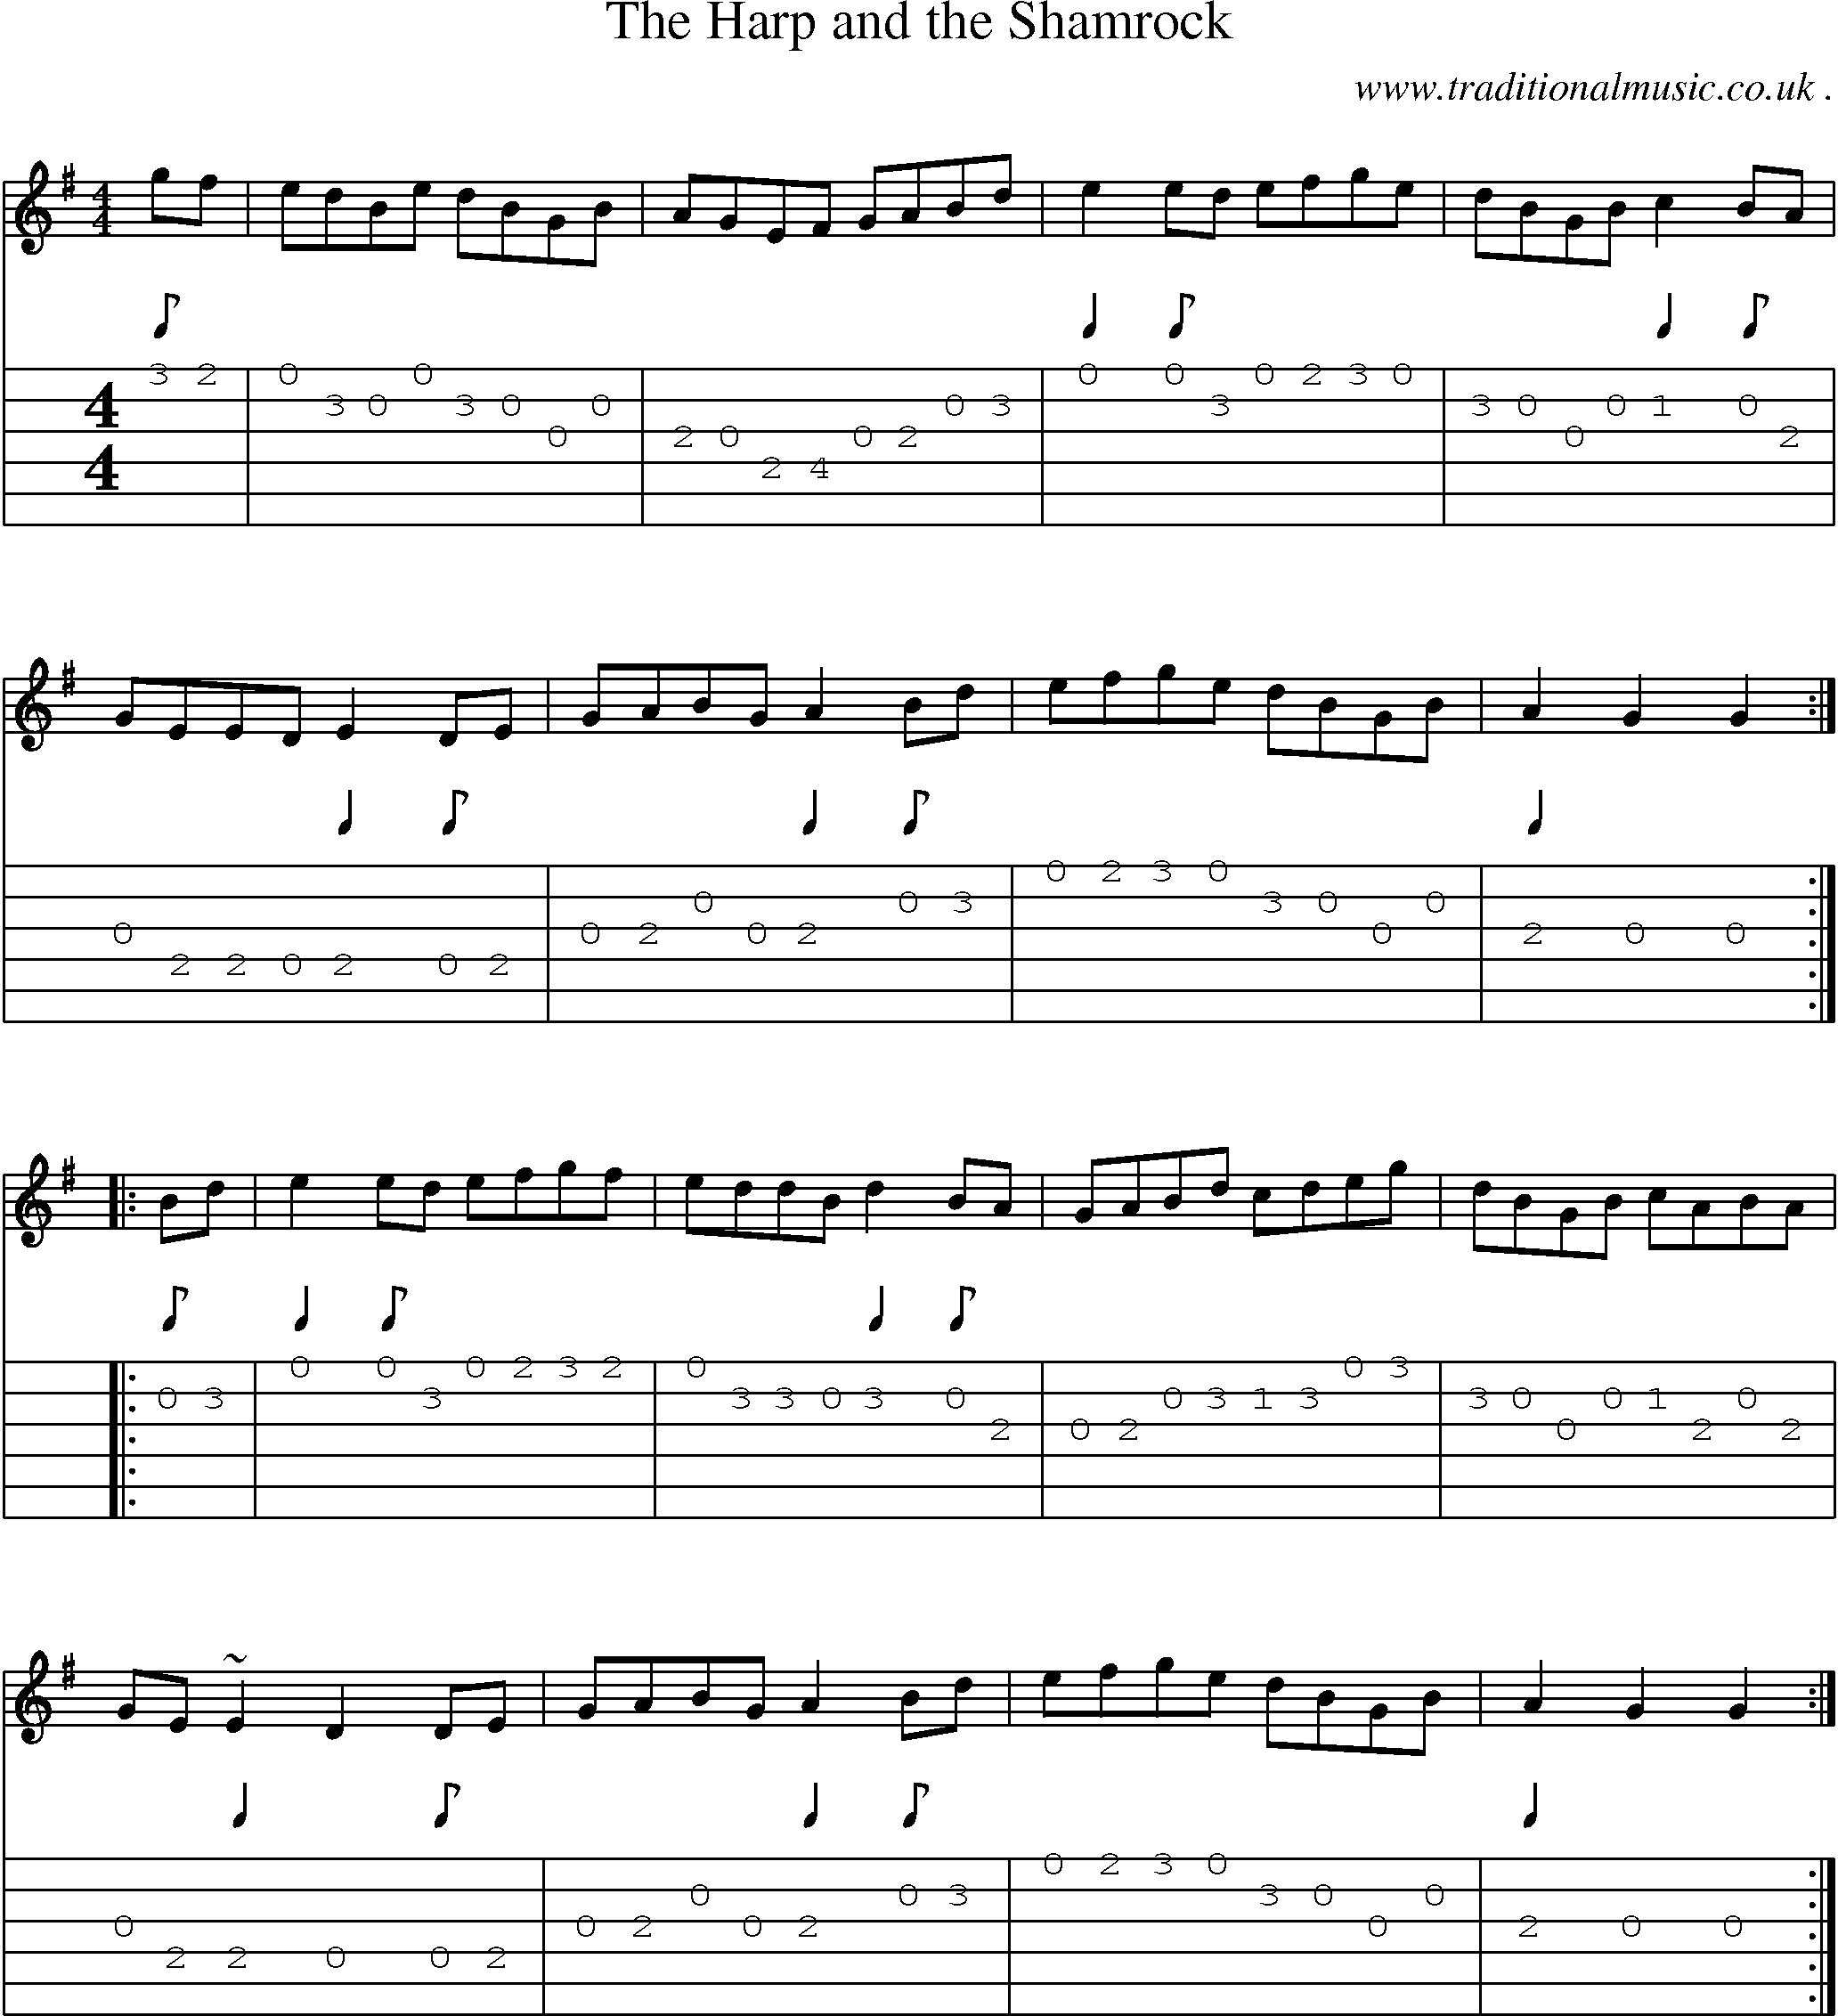 Sheet-music  score, Chords and Guitar Tabs for The Harp And The Shamrock